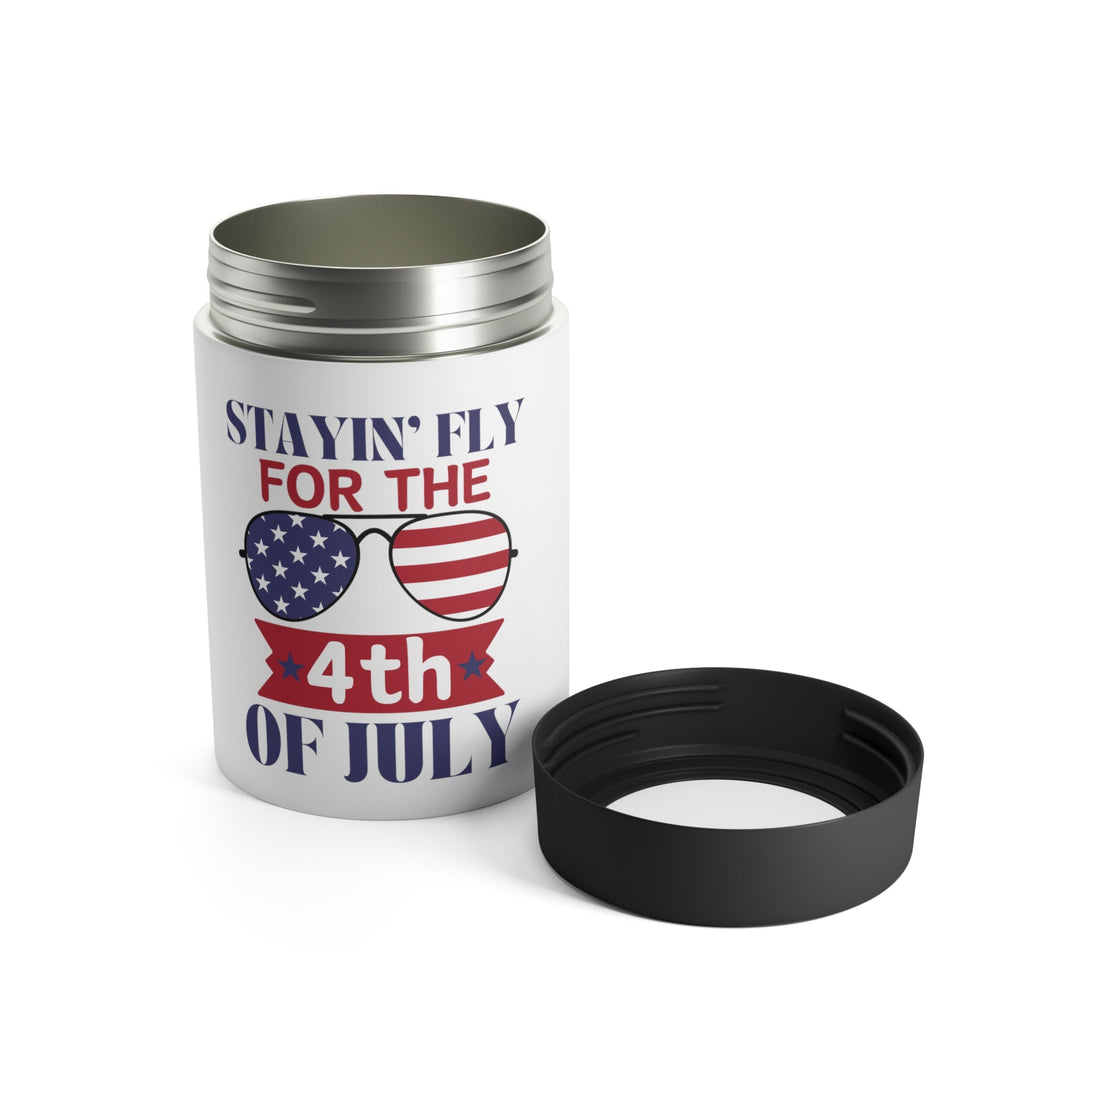 Stayin' Fly This 4th Can Holder - Mug - Positively Sassy - Stayin' Fly This 4th Can Holder